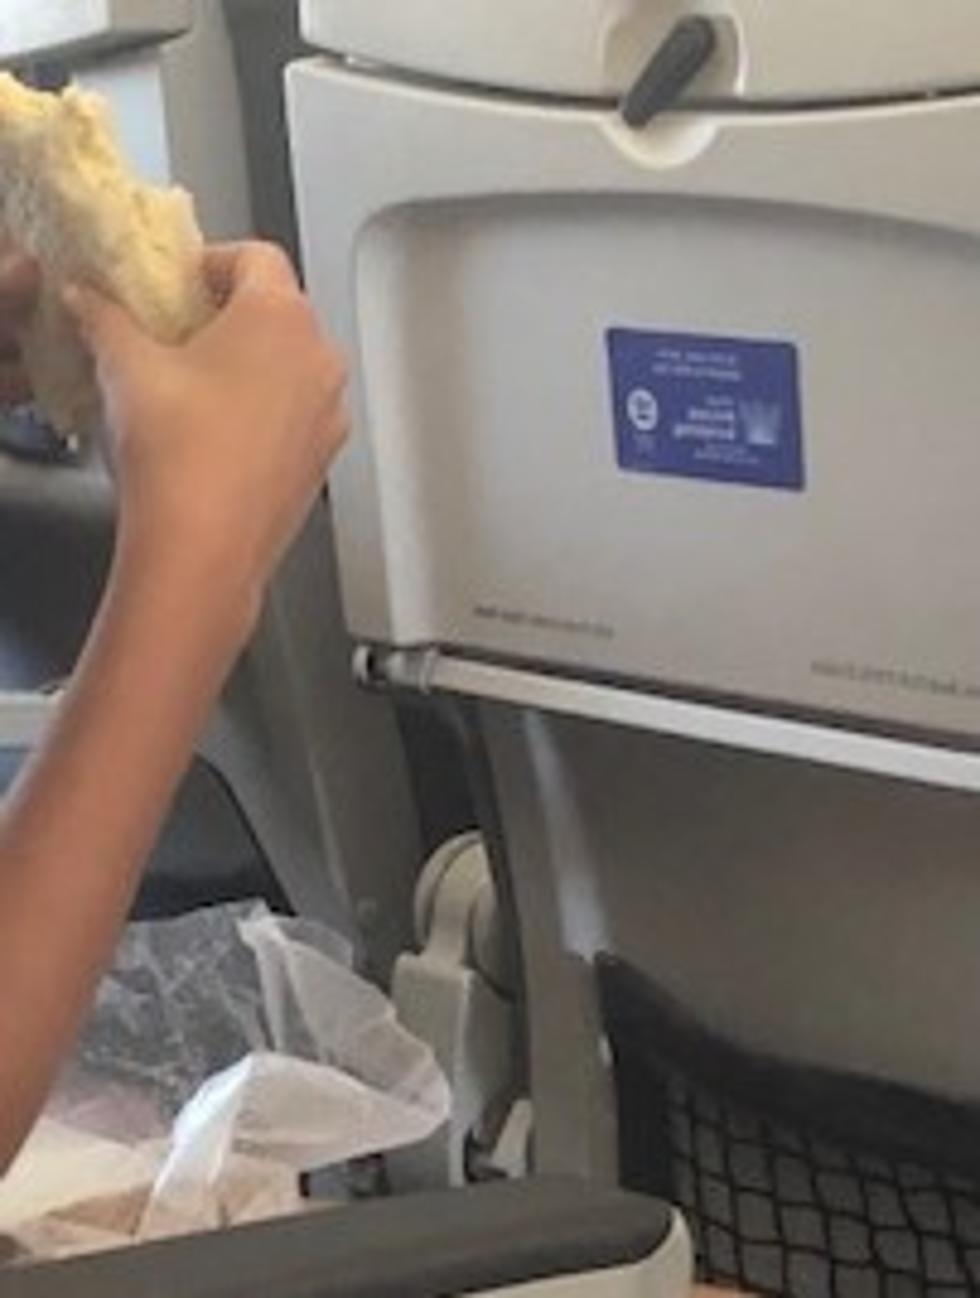 Eating Egg Salad & Other Things You Should Never Do On A Plane